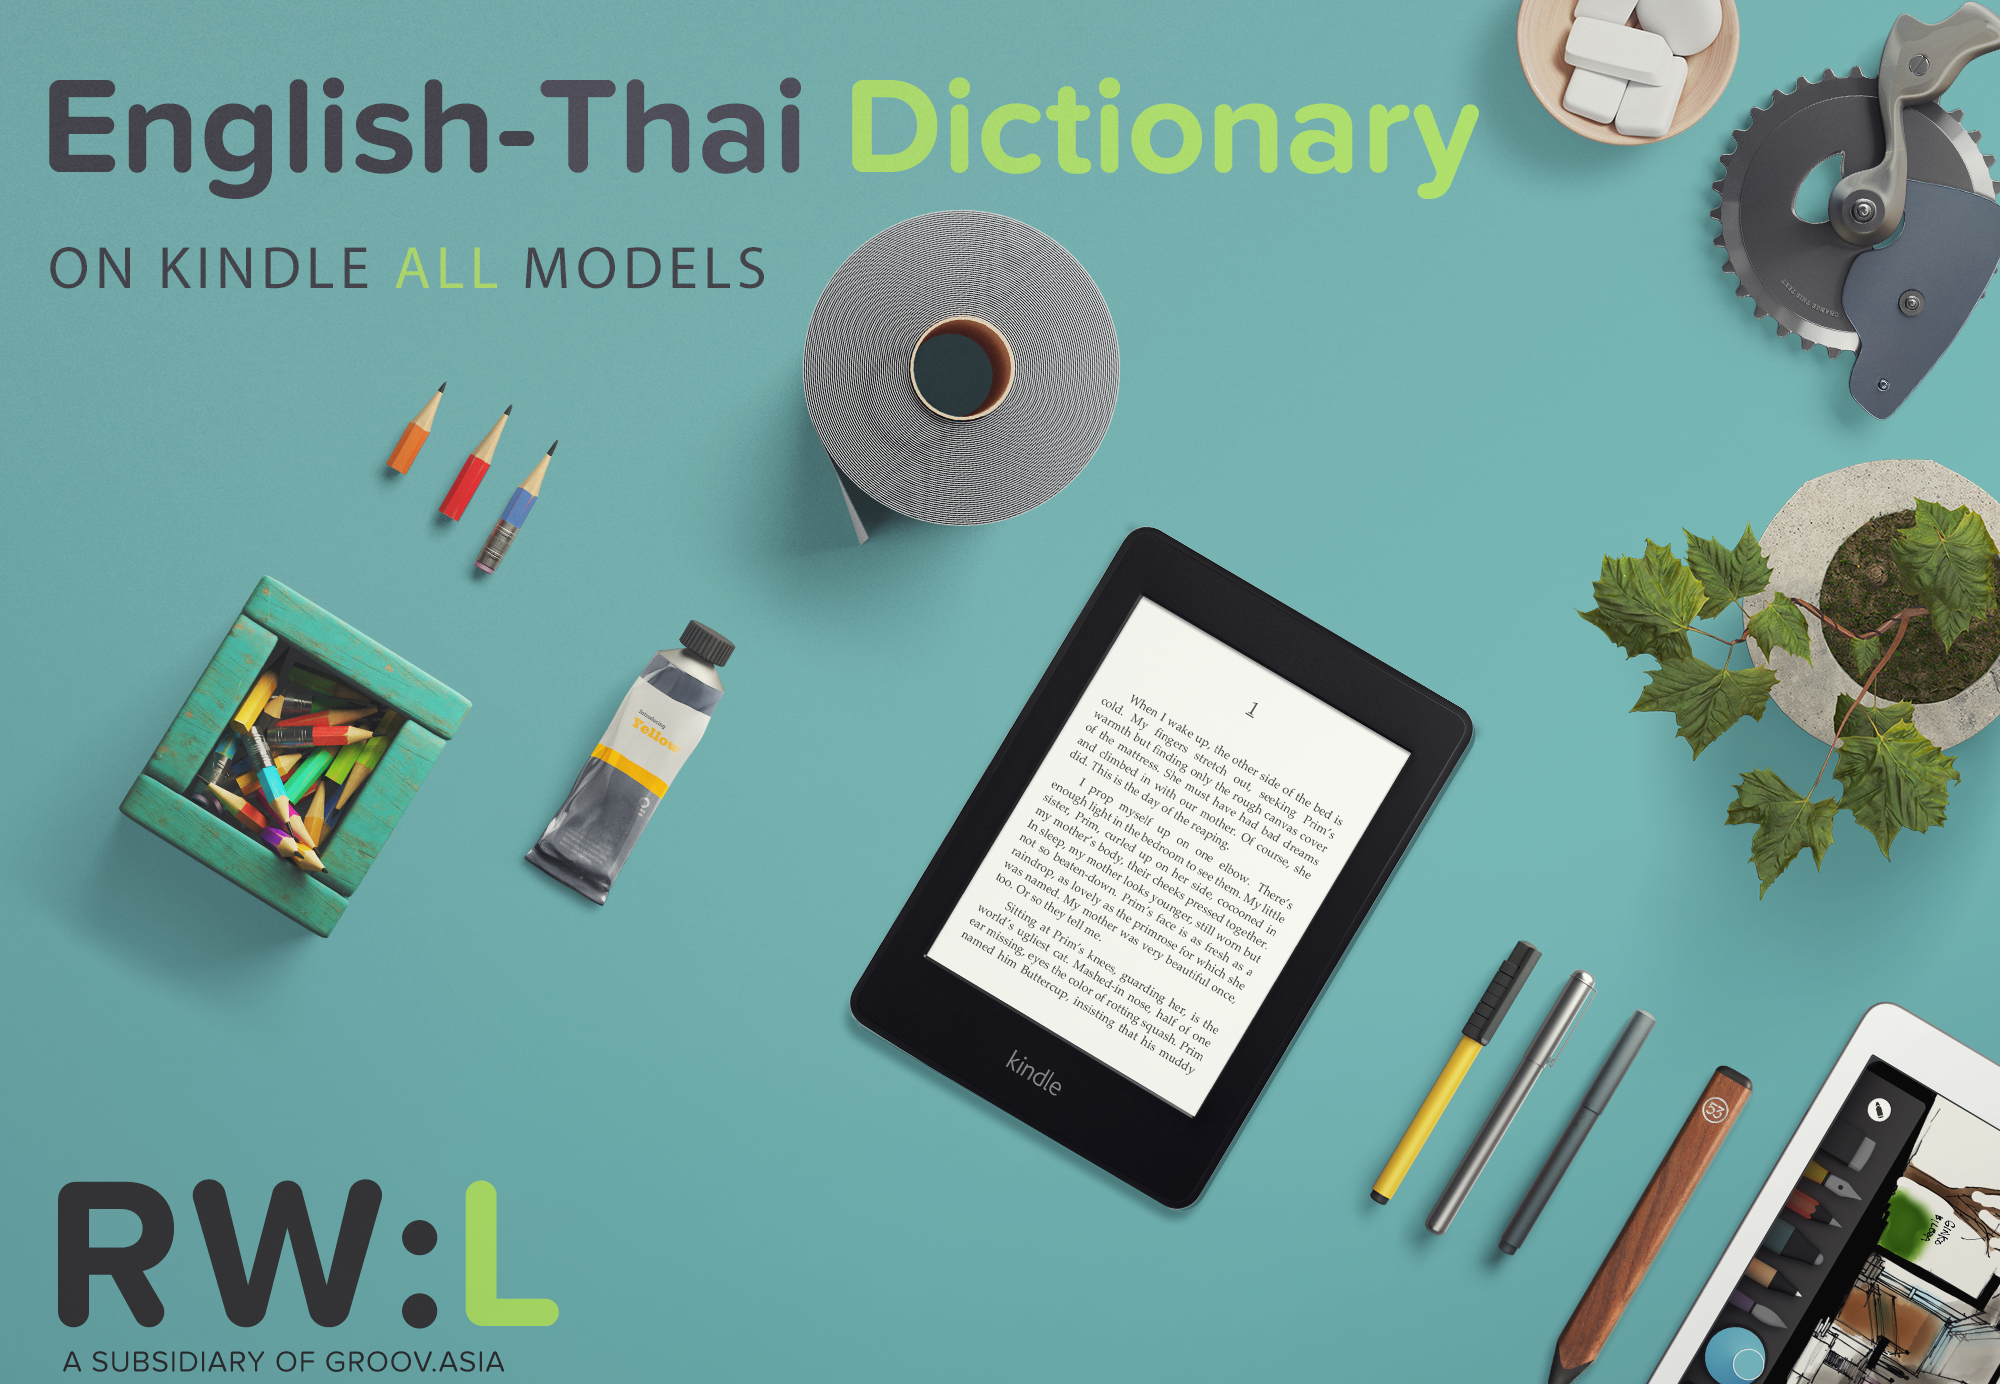 how to use dictionary in kindle